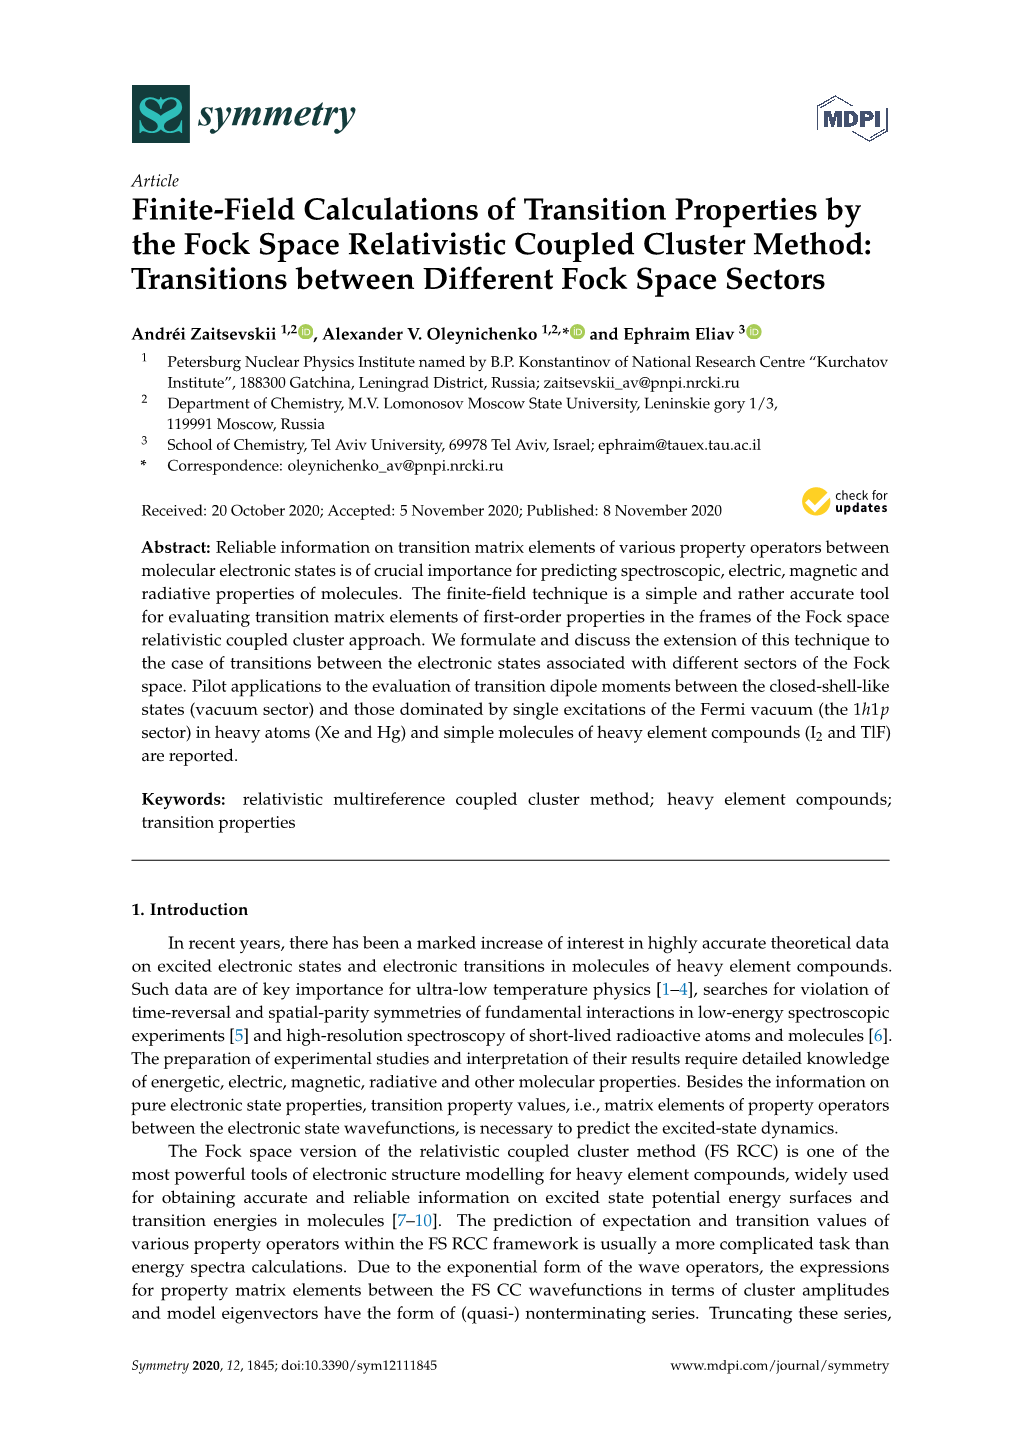 Finite-Field Calculations of Transition Properties by the Fock Space Relativistic Coupled Cluster Method: Transitions Between Different Fock Space Sectors